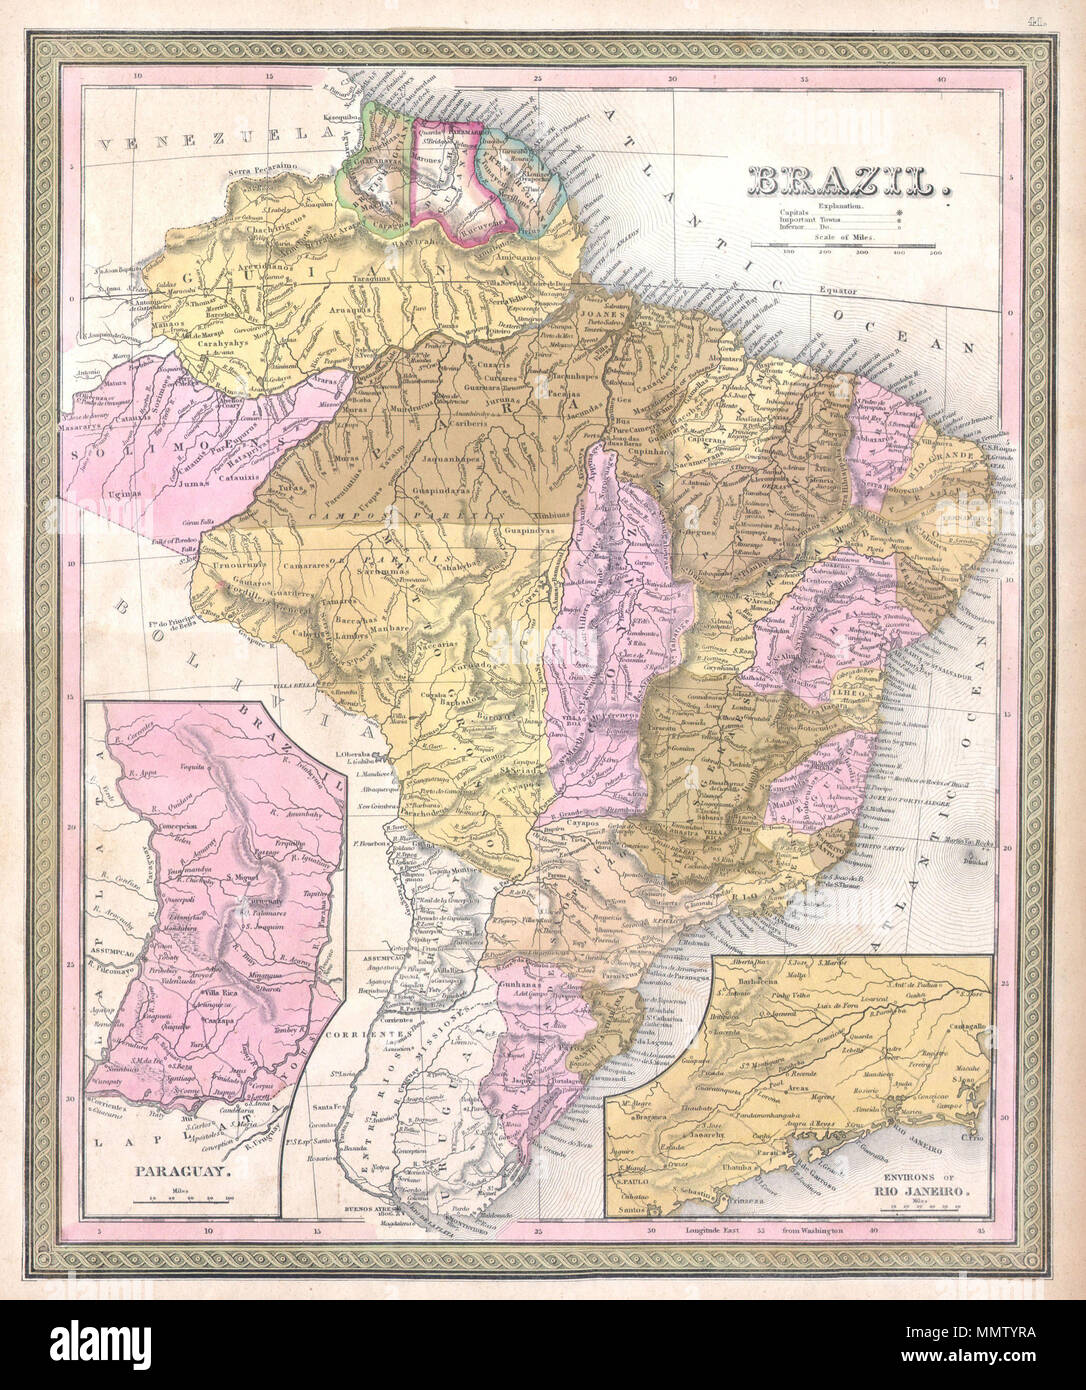 .  English: A fine and rare 1849 S. A. Mitchell Sr. map of Brazil and Paraguay. Map depicts the eastern part of South American including the Guianas, Brazil ( Brasil ) and Paraguay. Features impressive detail of the amazon basin and the interior of Brazil. Inset of the Environs of Rio de Jenario at the bottom right. Inset of Paraguay at the bottom left.  Brazil.. 1850. 1850 Mitchell Map of Brazil, Paraguay and Guiana - Geographicus - Brazil-m-1849 Stock Photo